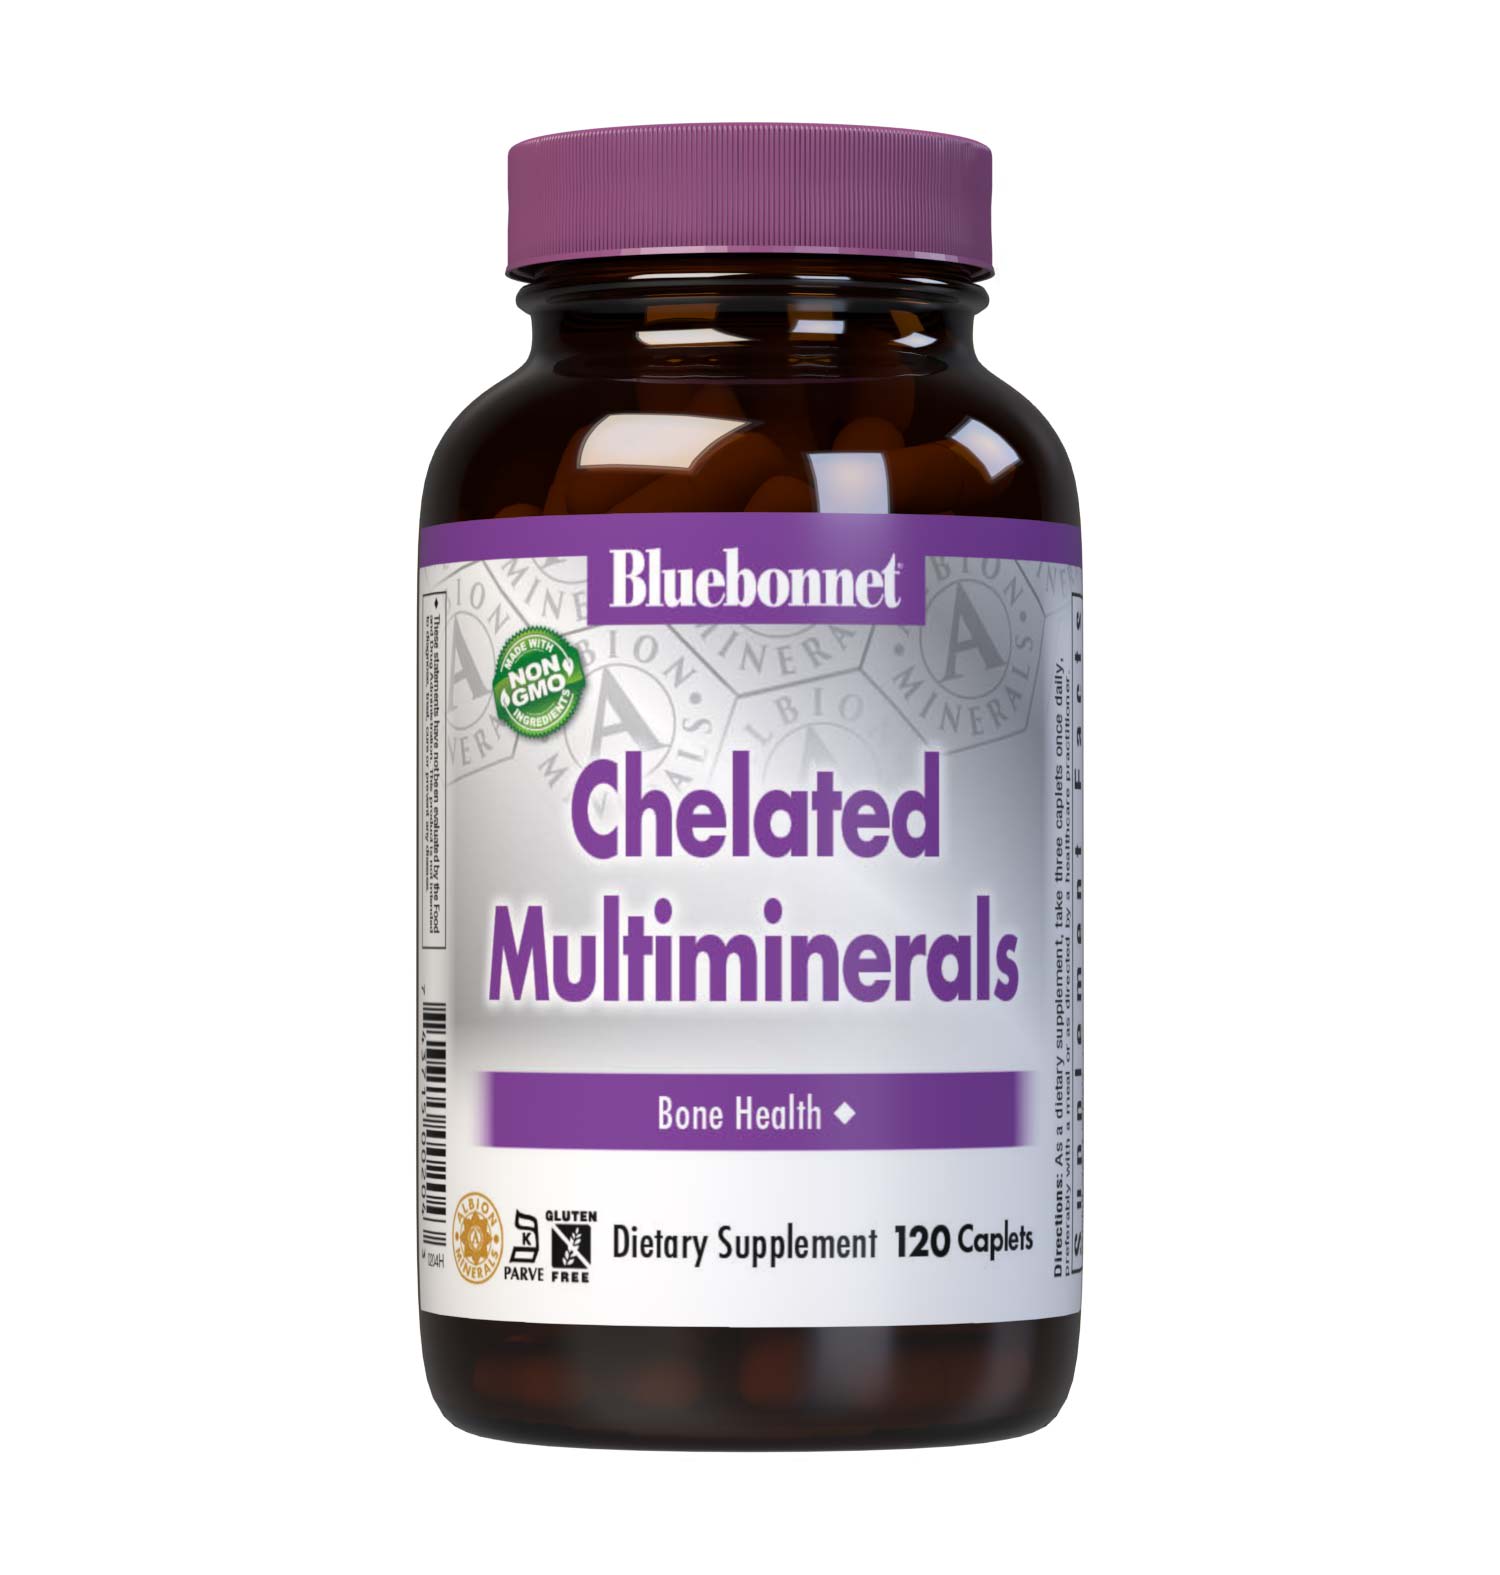 Bluebonnet’s Albion Chelated Multiminerals 120 Caplets are formulated with a fully reacted amino acid chelate multimineral supplement formulated with iron and advanced chelating agents, including: malates, citrates and glycinates. #size_120 count